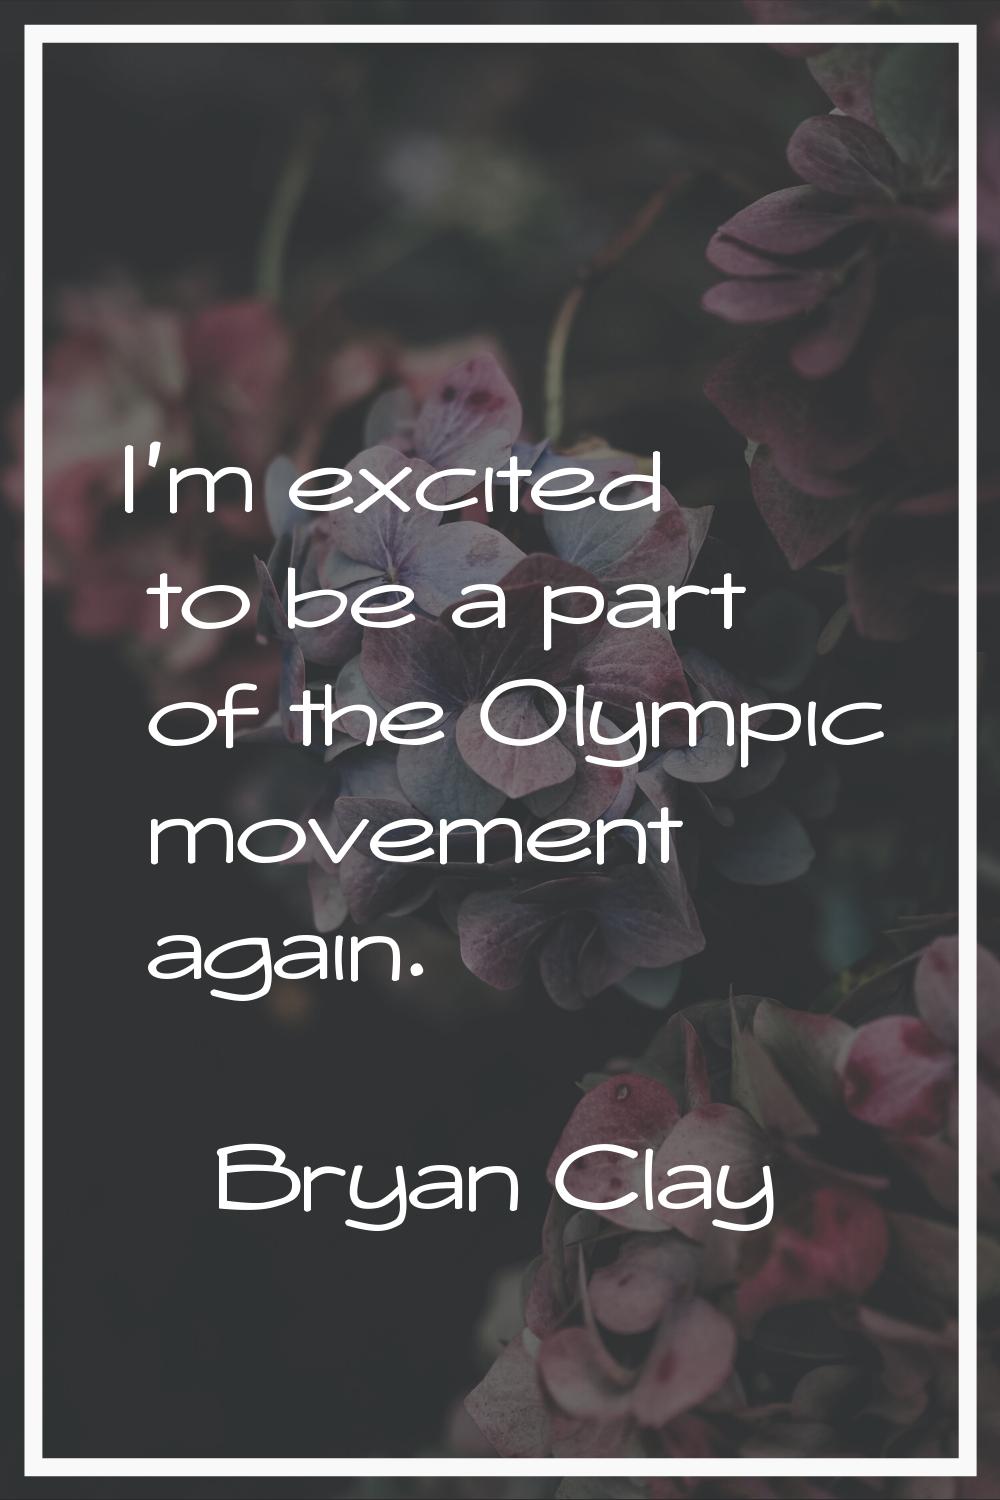 I'm excited to be a part of the Olympic movement again.